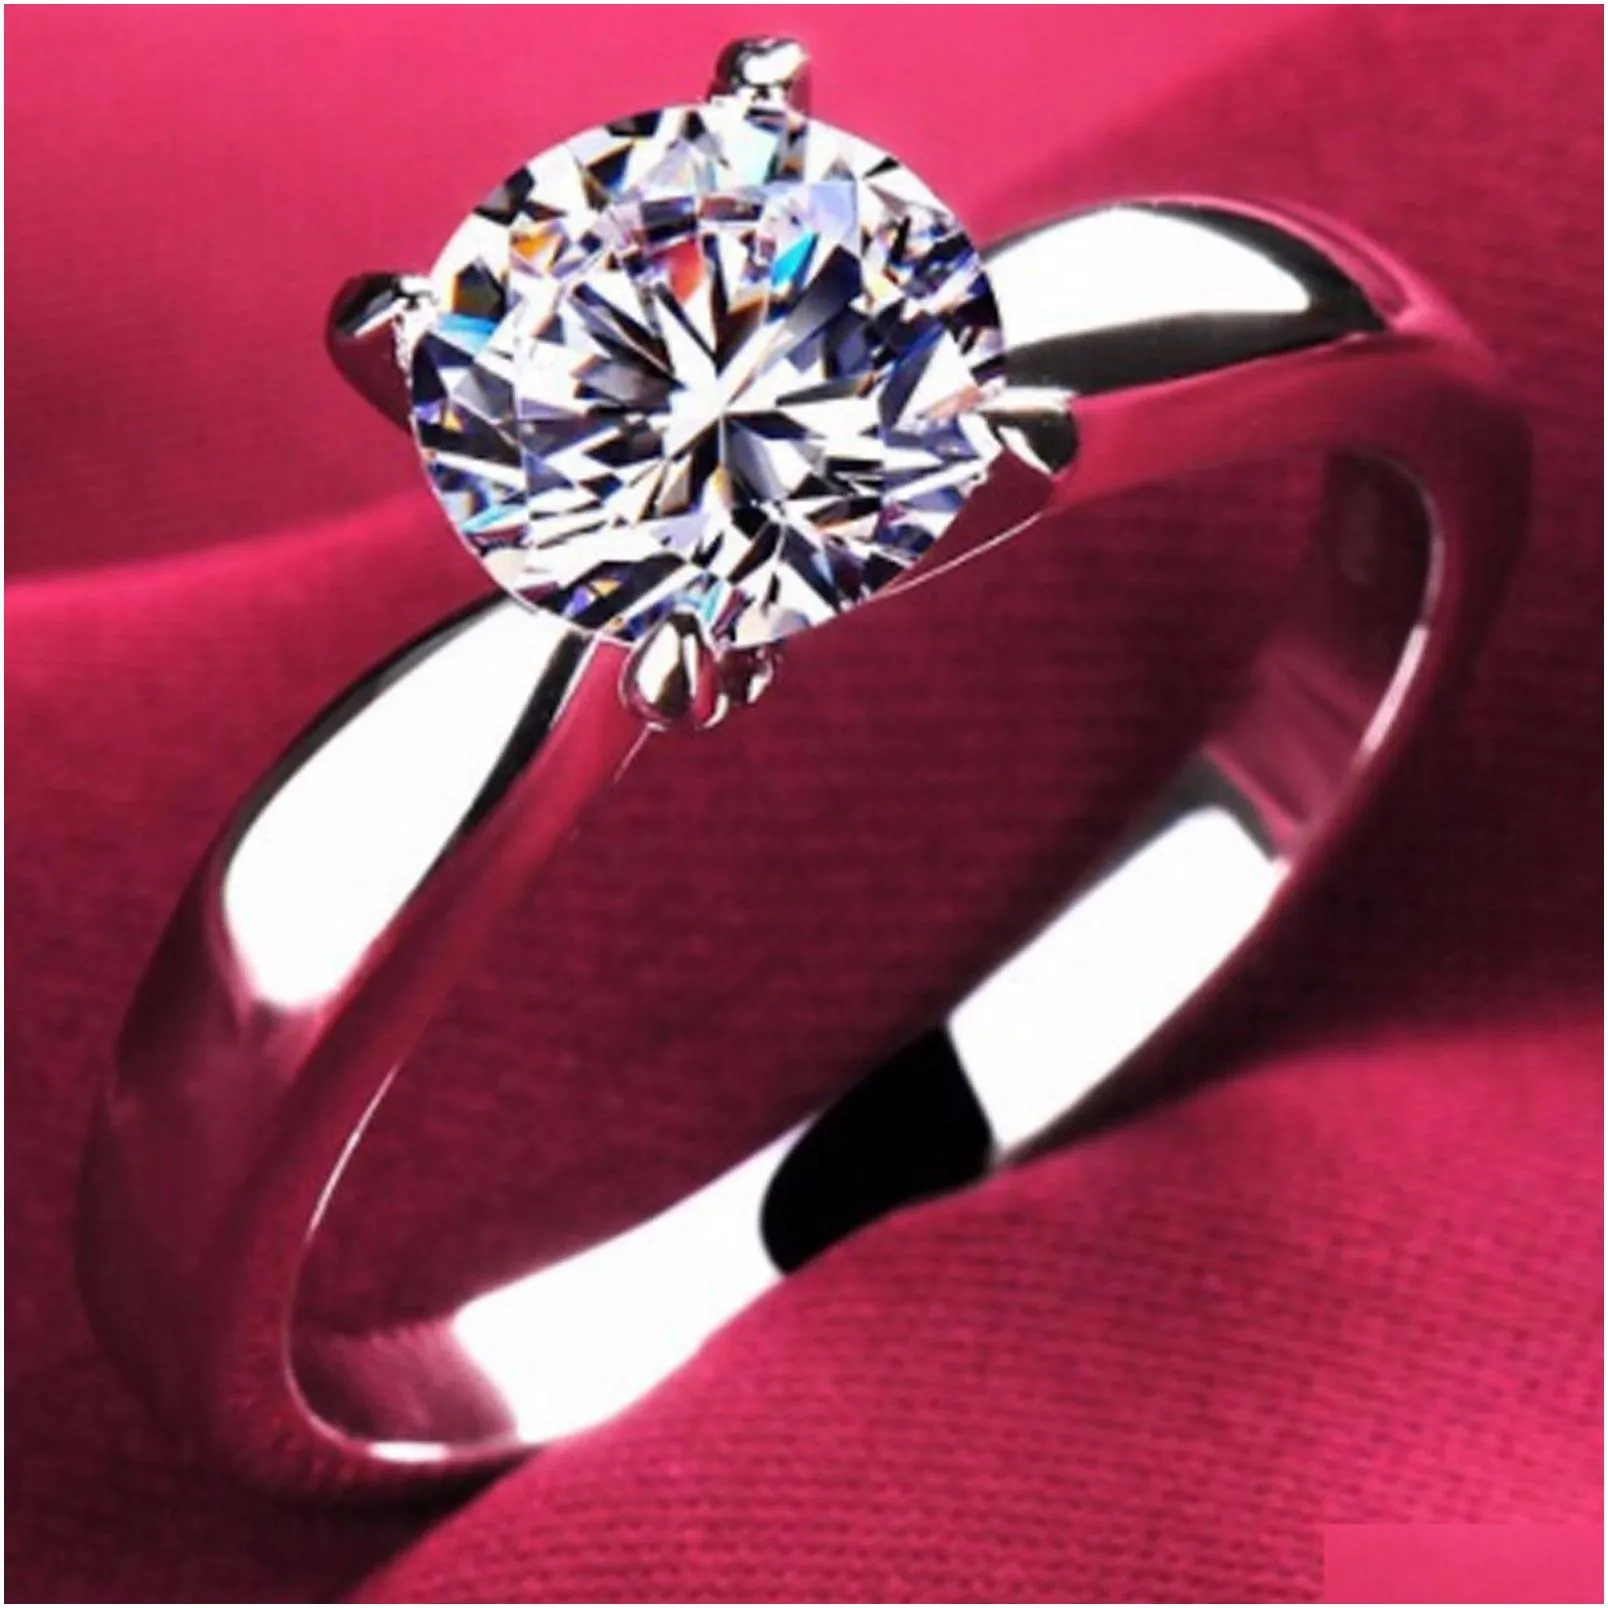 white gold rings for women round cut zirconia diamond solitaire ring wedding band engagement bridal